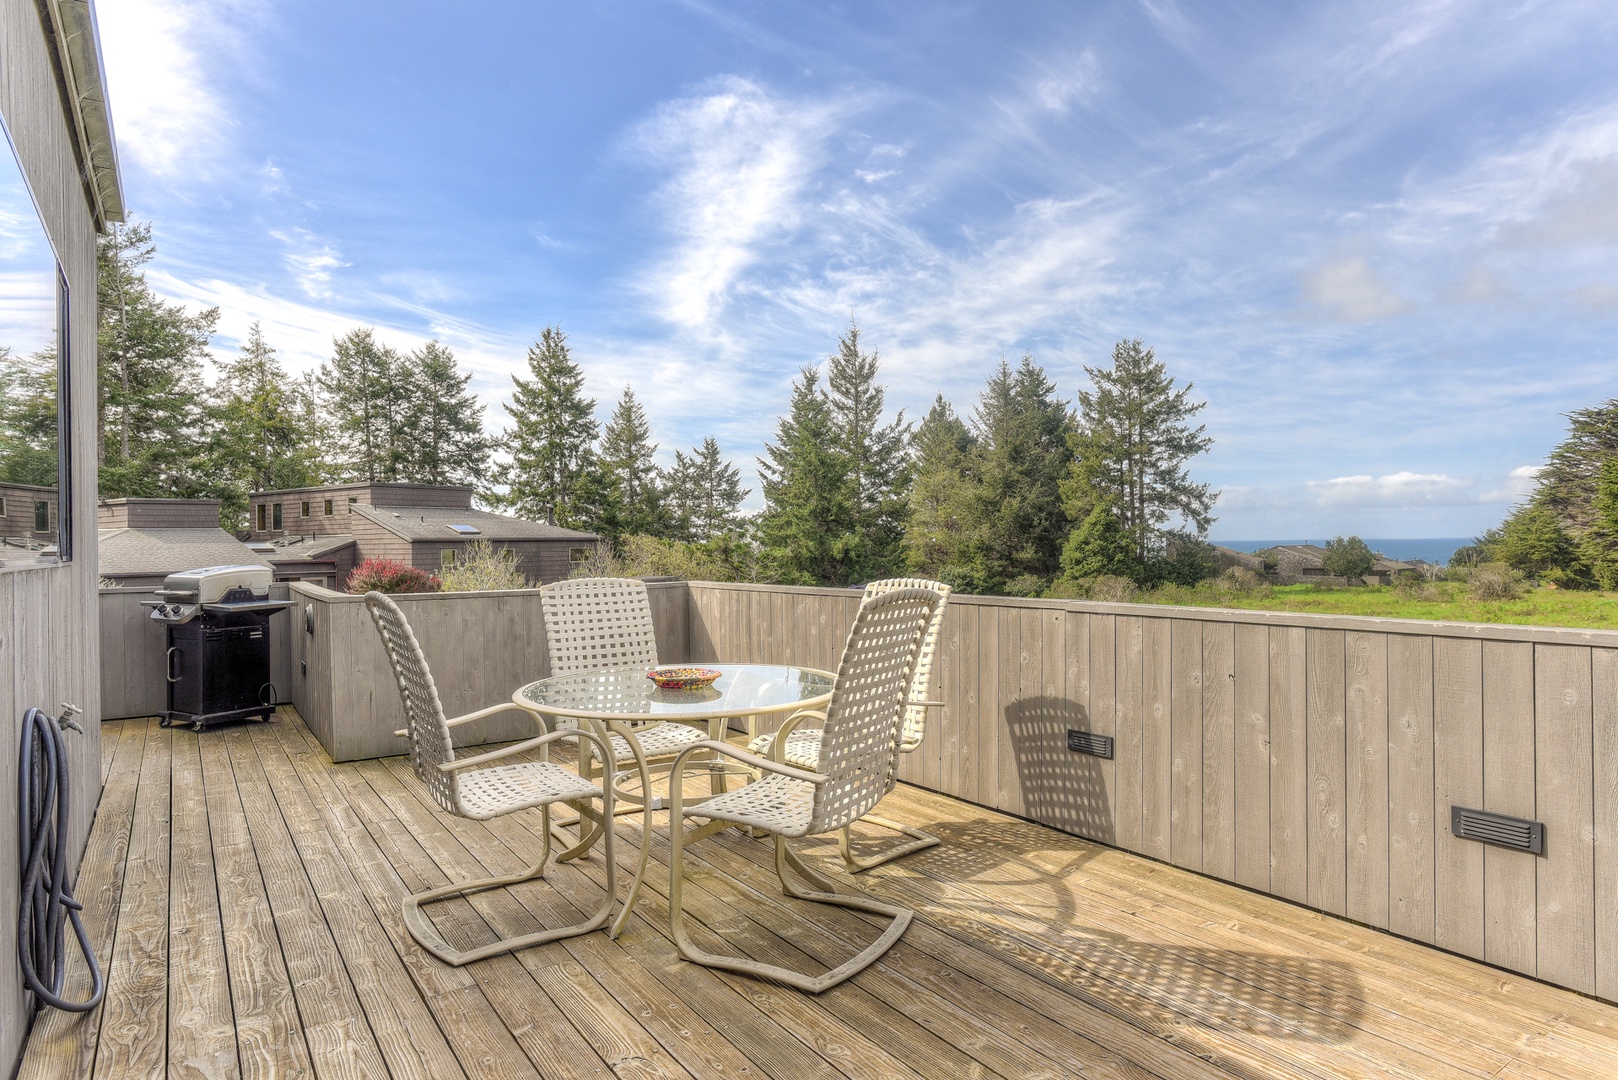 Spacious deck with outdoor seating, grill, and hot tub